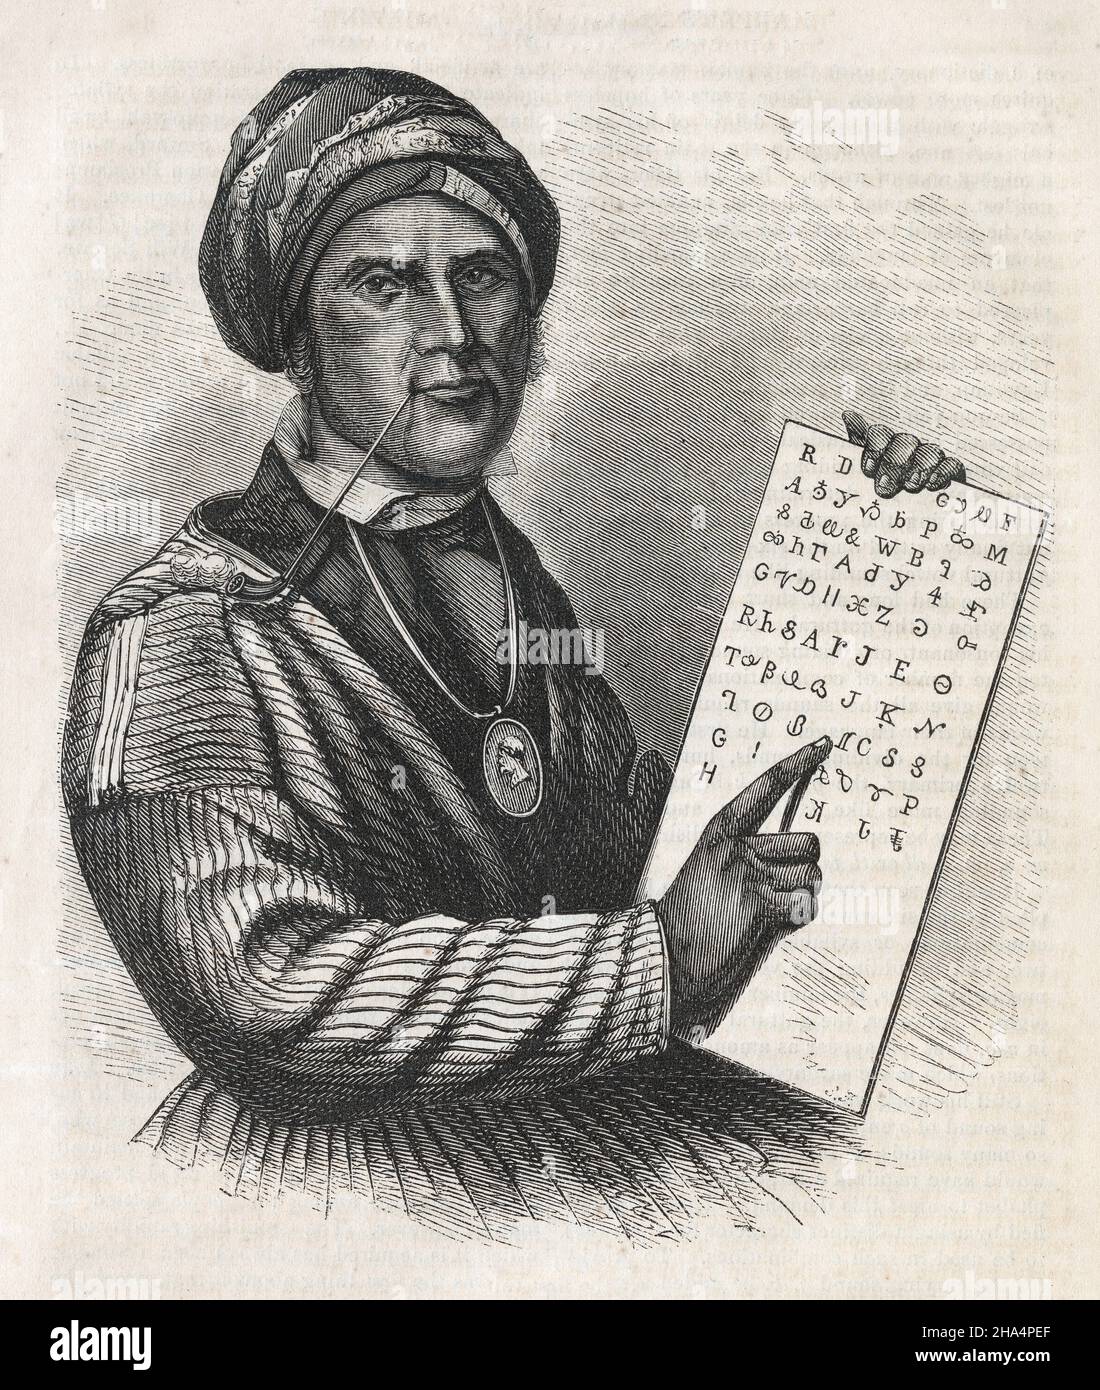 Antique 1870 engraving of Sequoyah. Sequoyah (c1770-1843) was a Native American polymath of the Cherokee Nation. SOURCE: ORIGINAL ENGRAVING Stock Photo